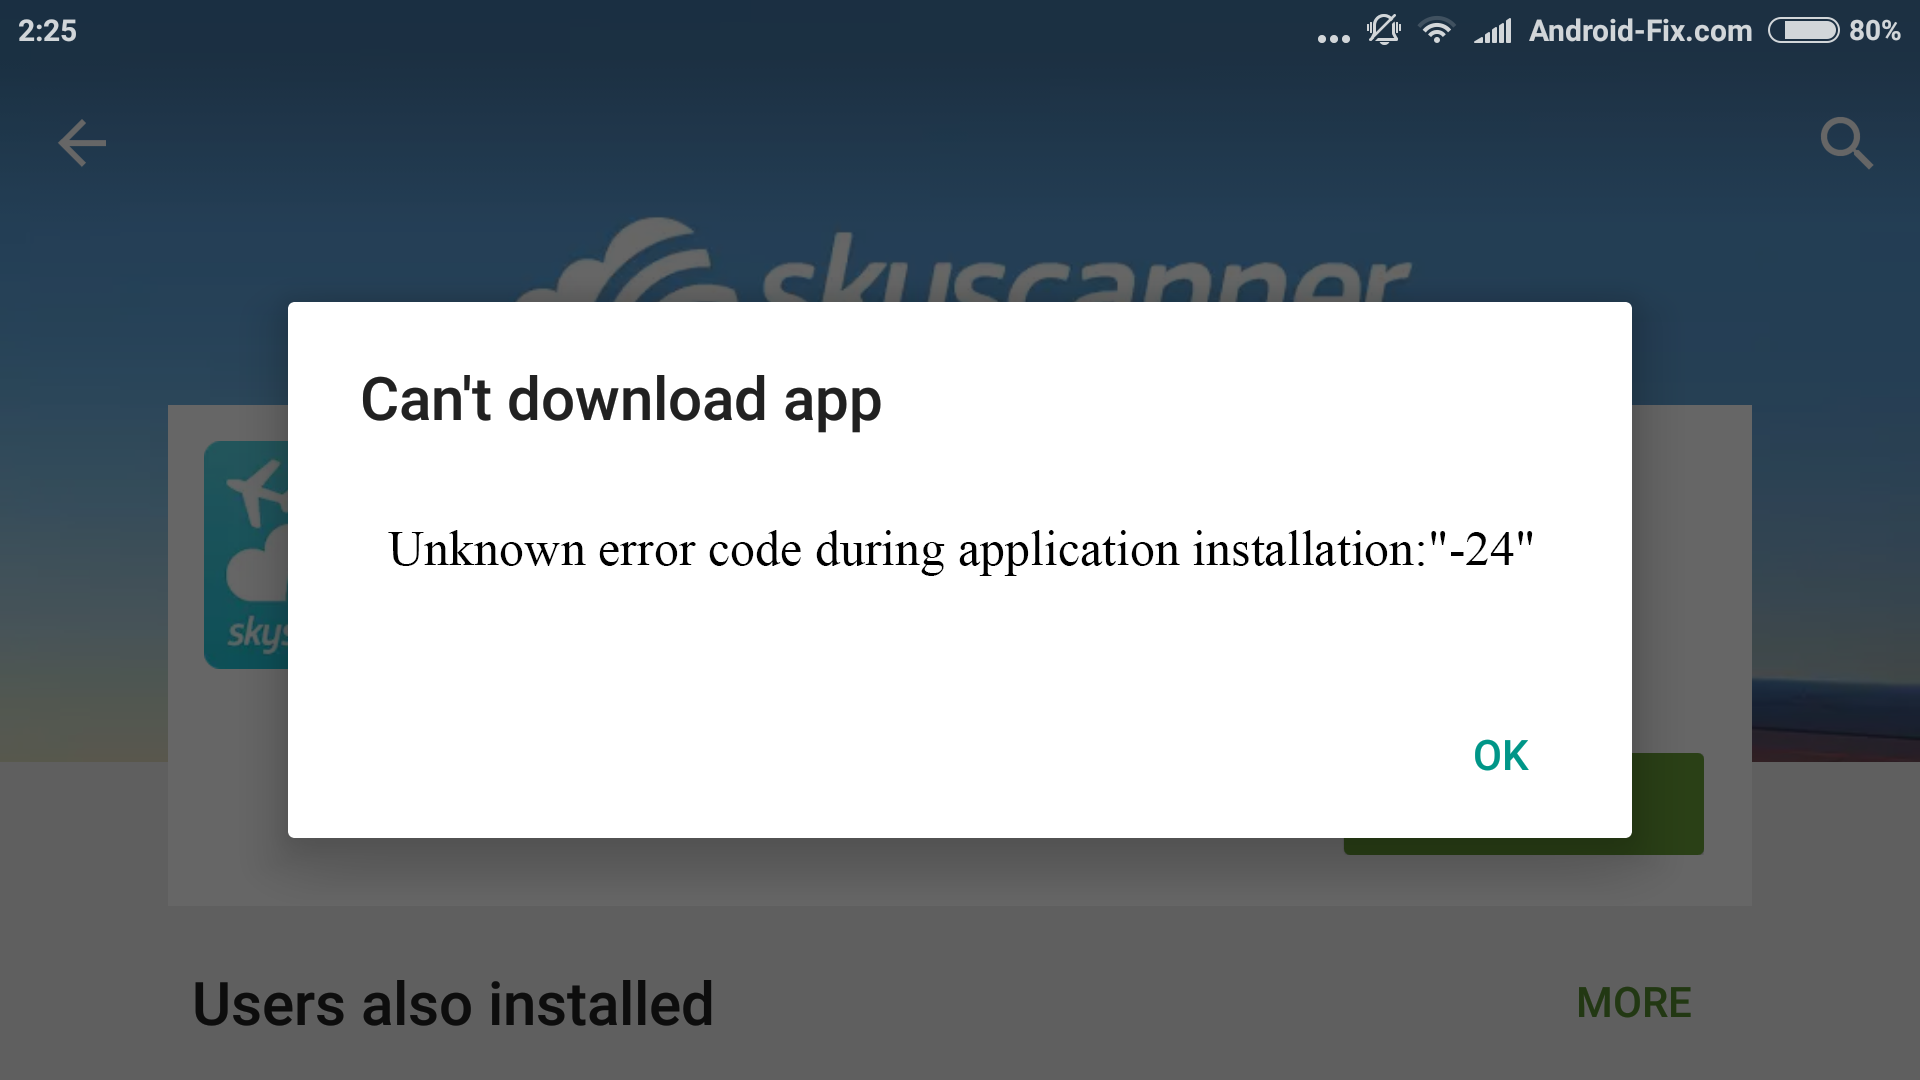 Reinstalling the application may fix this problem